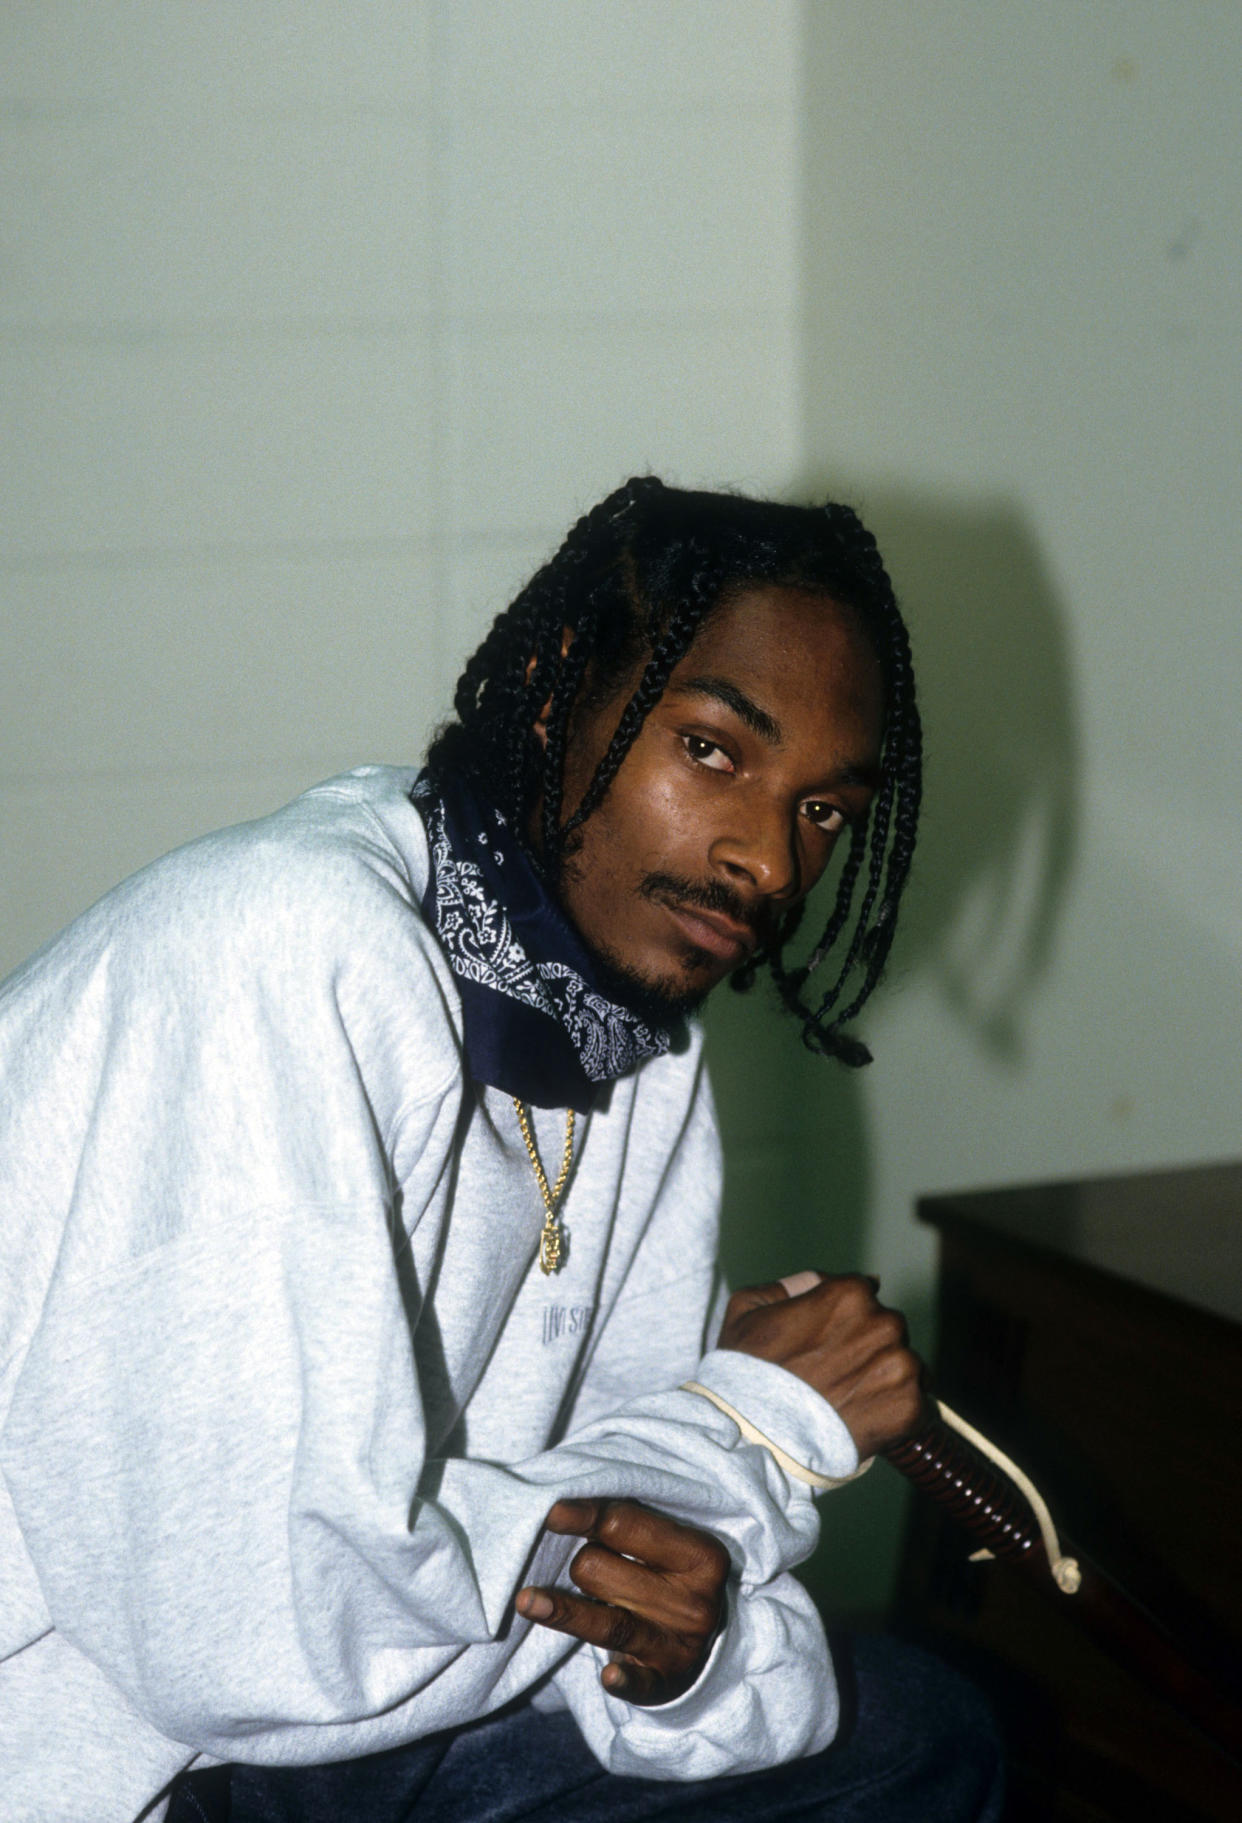  Snoop Dogg appears backstage when the Death Row Records label assembles at the 1995 Source Awards.  (Photo: Al Pereira/Getty Images/Michael Ochs Archives).